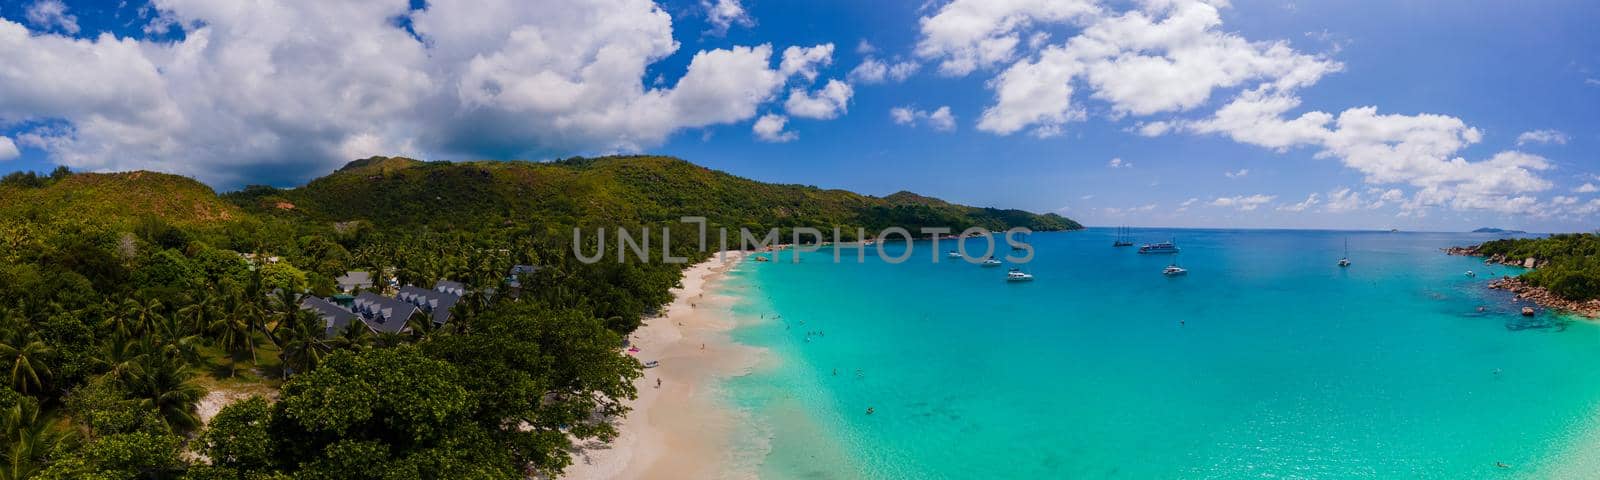 Praslin Seychelles tropical island with withe beaches and palm trees, Anse Lazio beach ,Palm tree stands over deserted tropical island dream beach in Anse Lazio, Seychelles by fokkebok